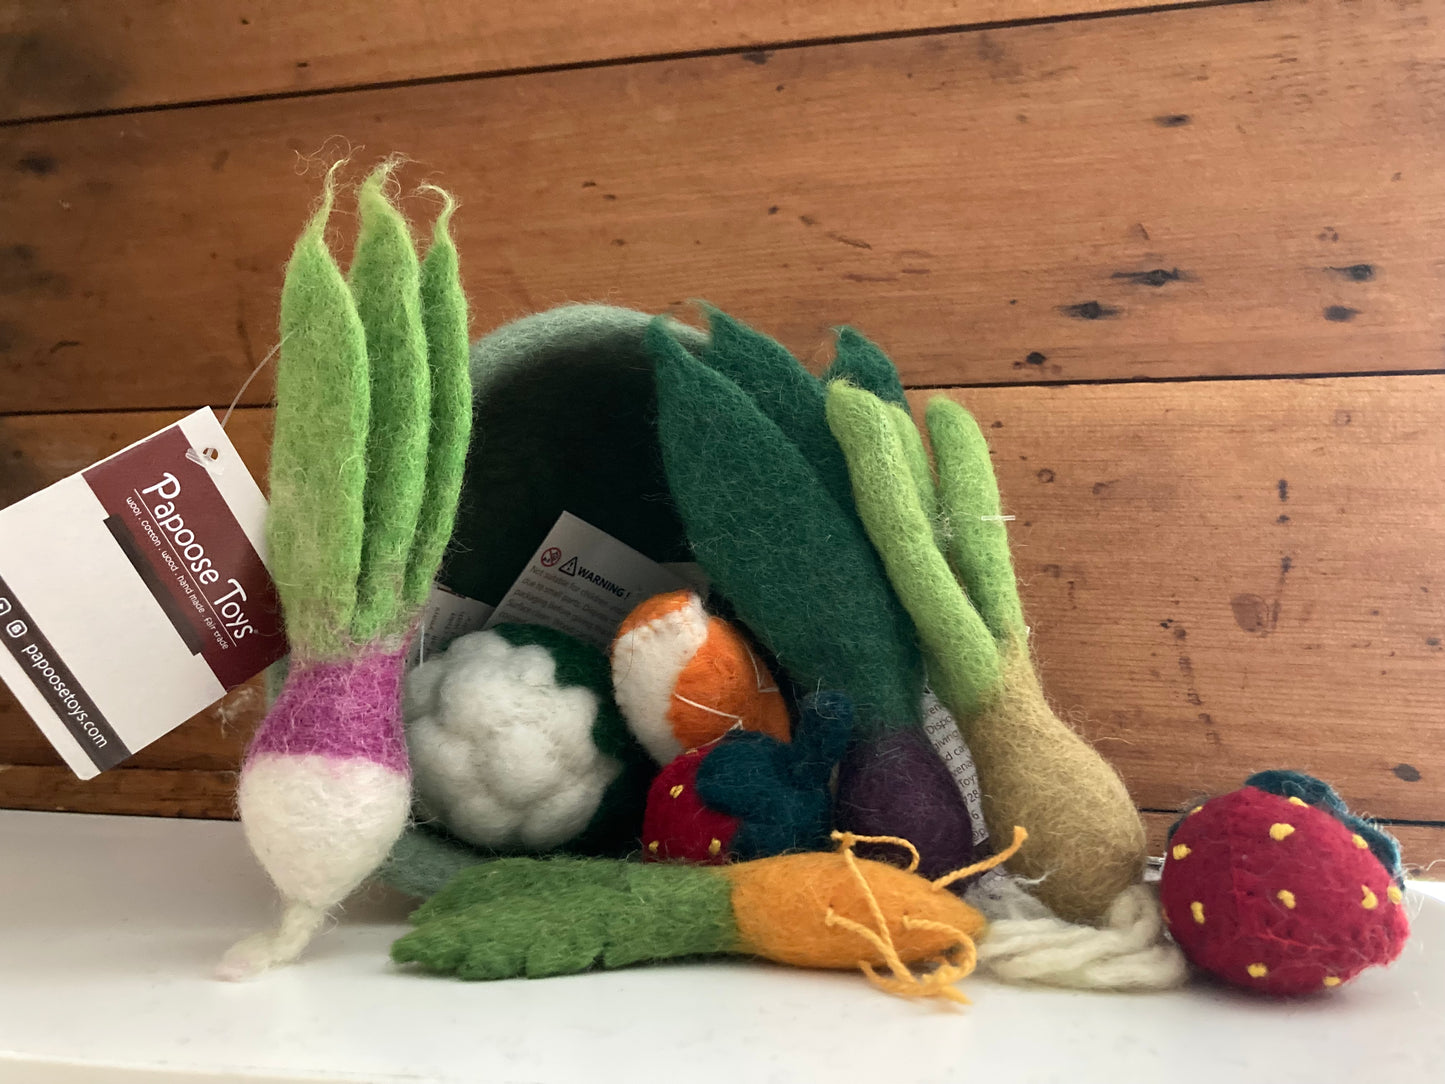 Kitchen Play Food - Felted FRUIT AND VEGETABLE BOWL Set, Small size